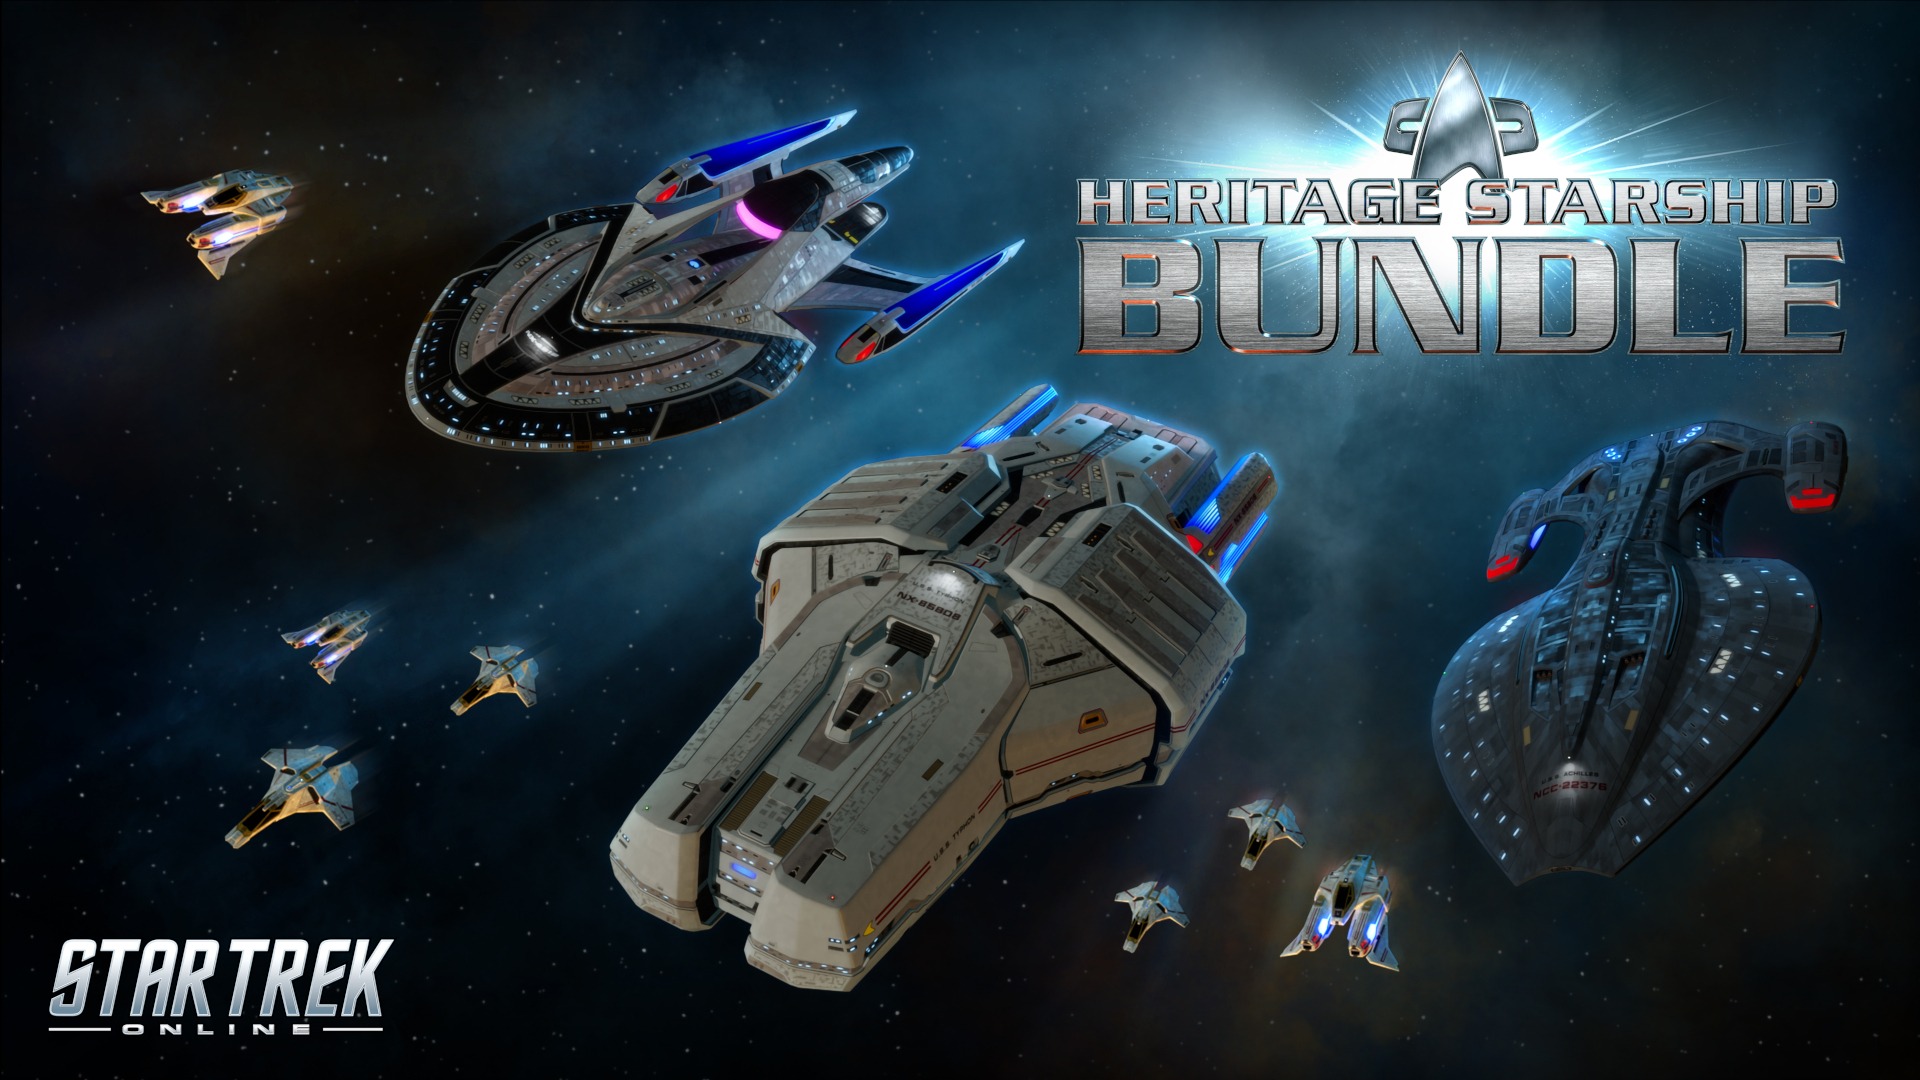 Star Trek Online’s New Bundle Adds Ships From Past Star Trek Games Like Armada, Invasion, And DSN: Dominion Wars [Video]